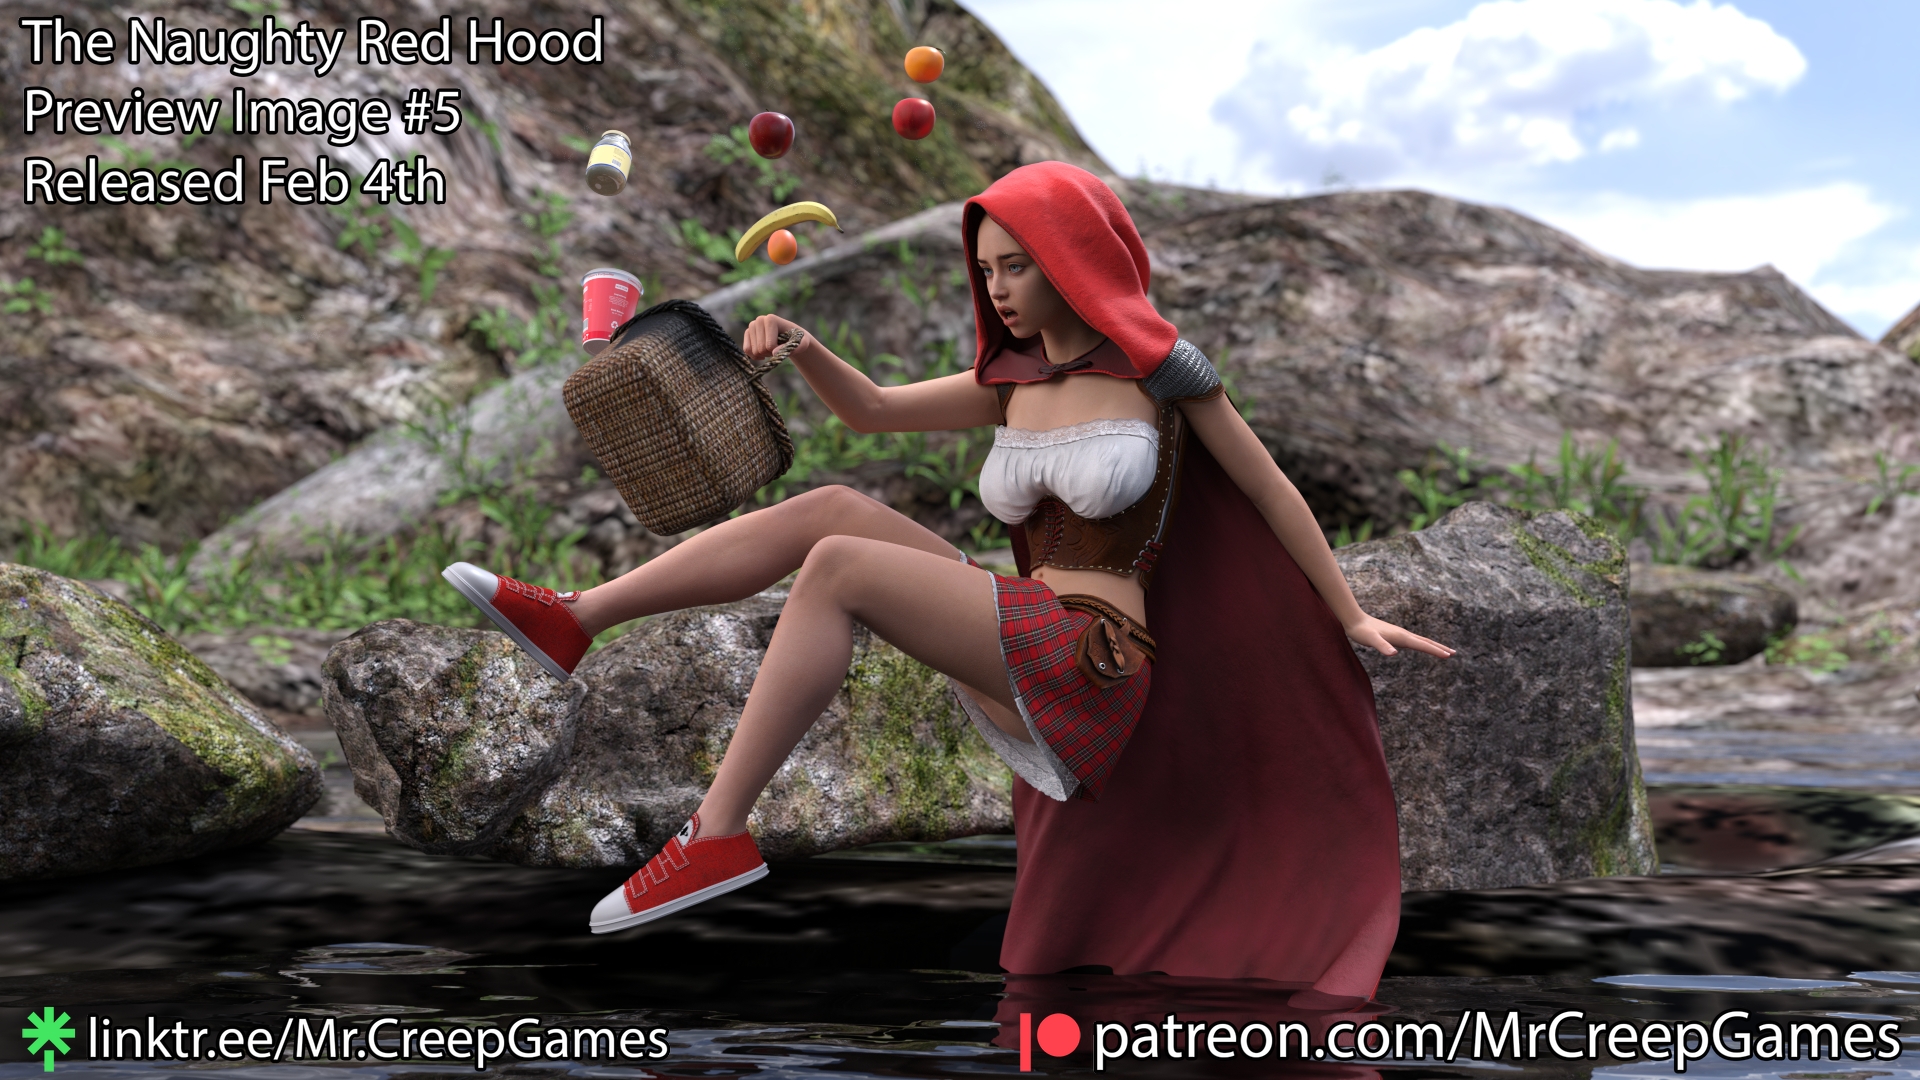 The Naughty Red Hood Preview #5  3d Porn 3d Girl Nsfw 3dnsfw Sexy Hot Nude Big boobs Pinup Pose Cute Teen